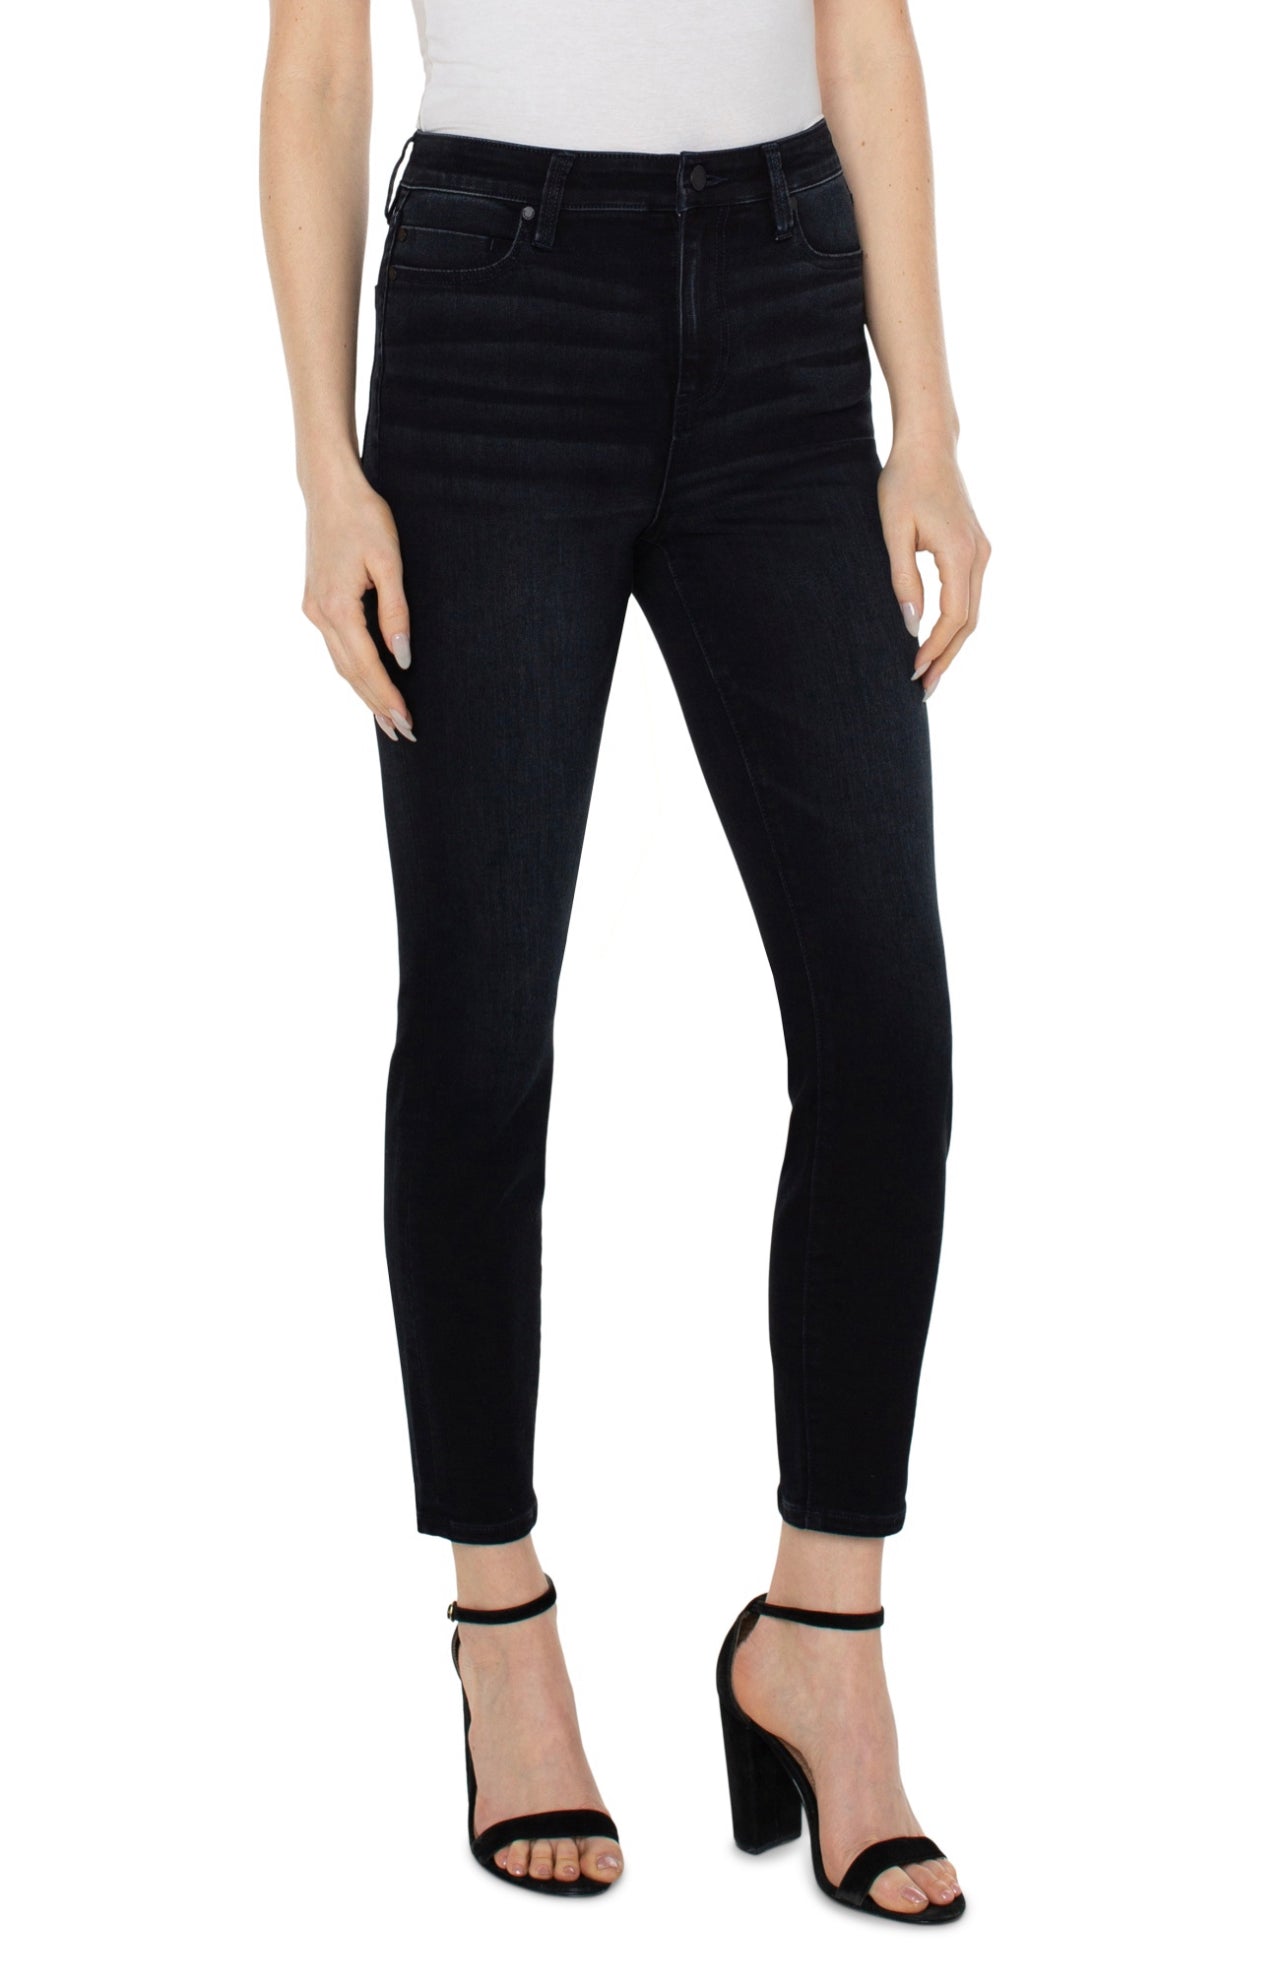 ABBY HIGH RISE ANKLE SKINNY